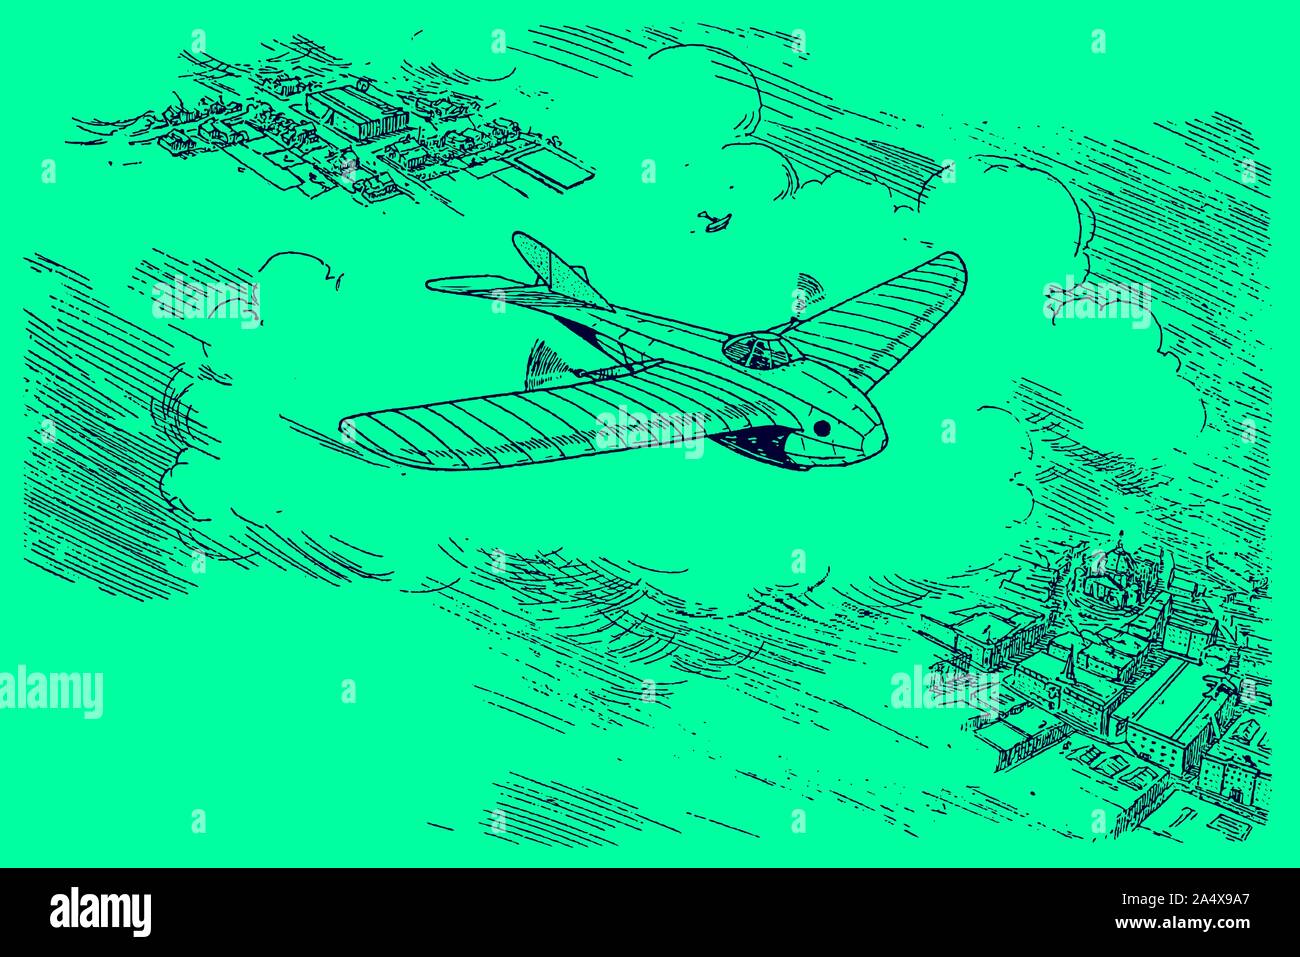 Futuristic study from the early 20th century of a monoplane aircraft flying over a city at high altitude. Illustration on a green background. Editable Stock Vector